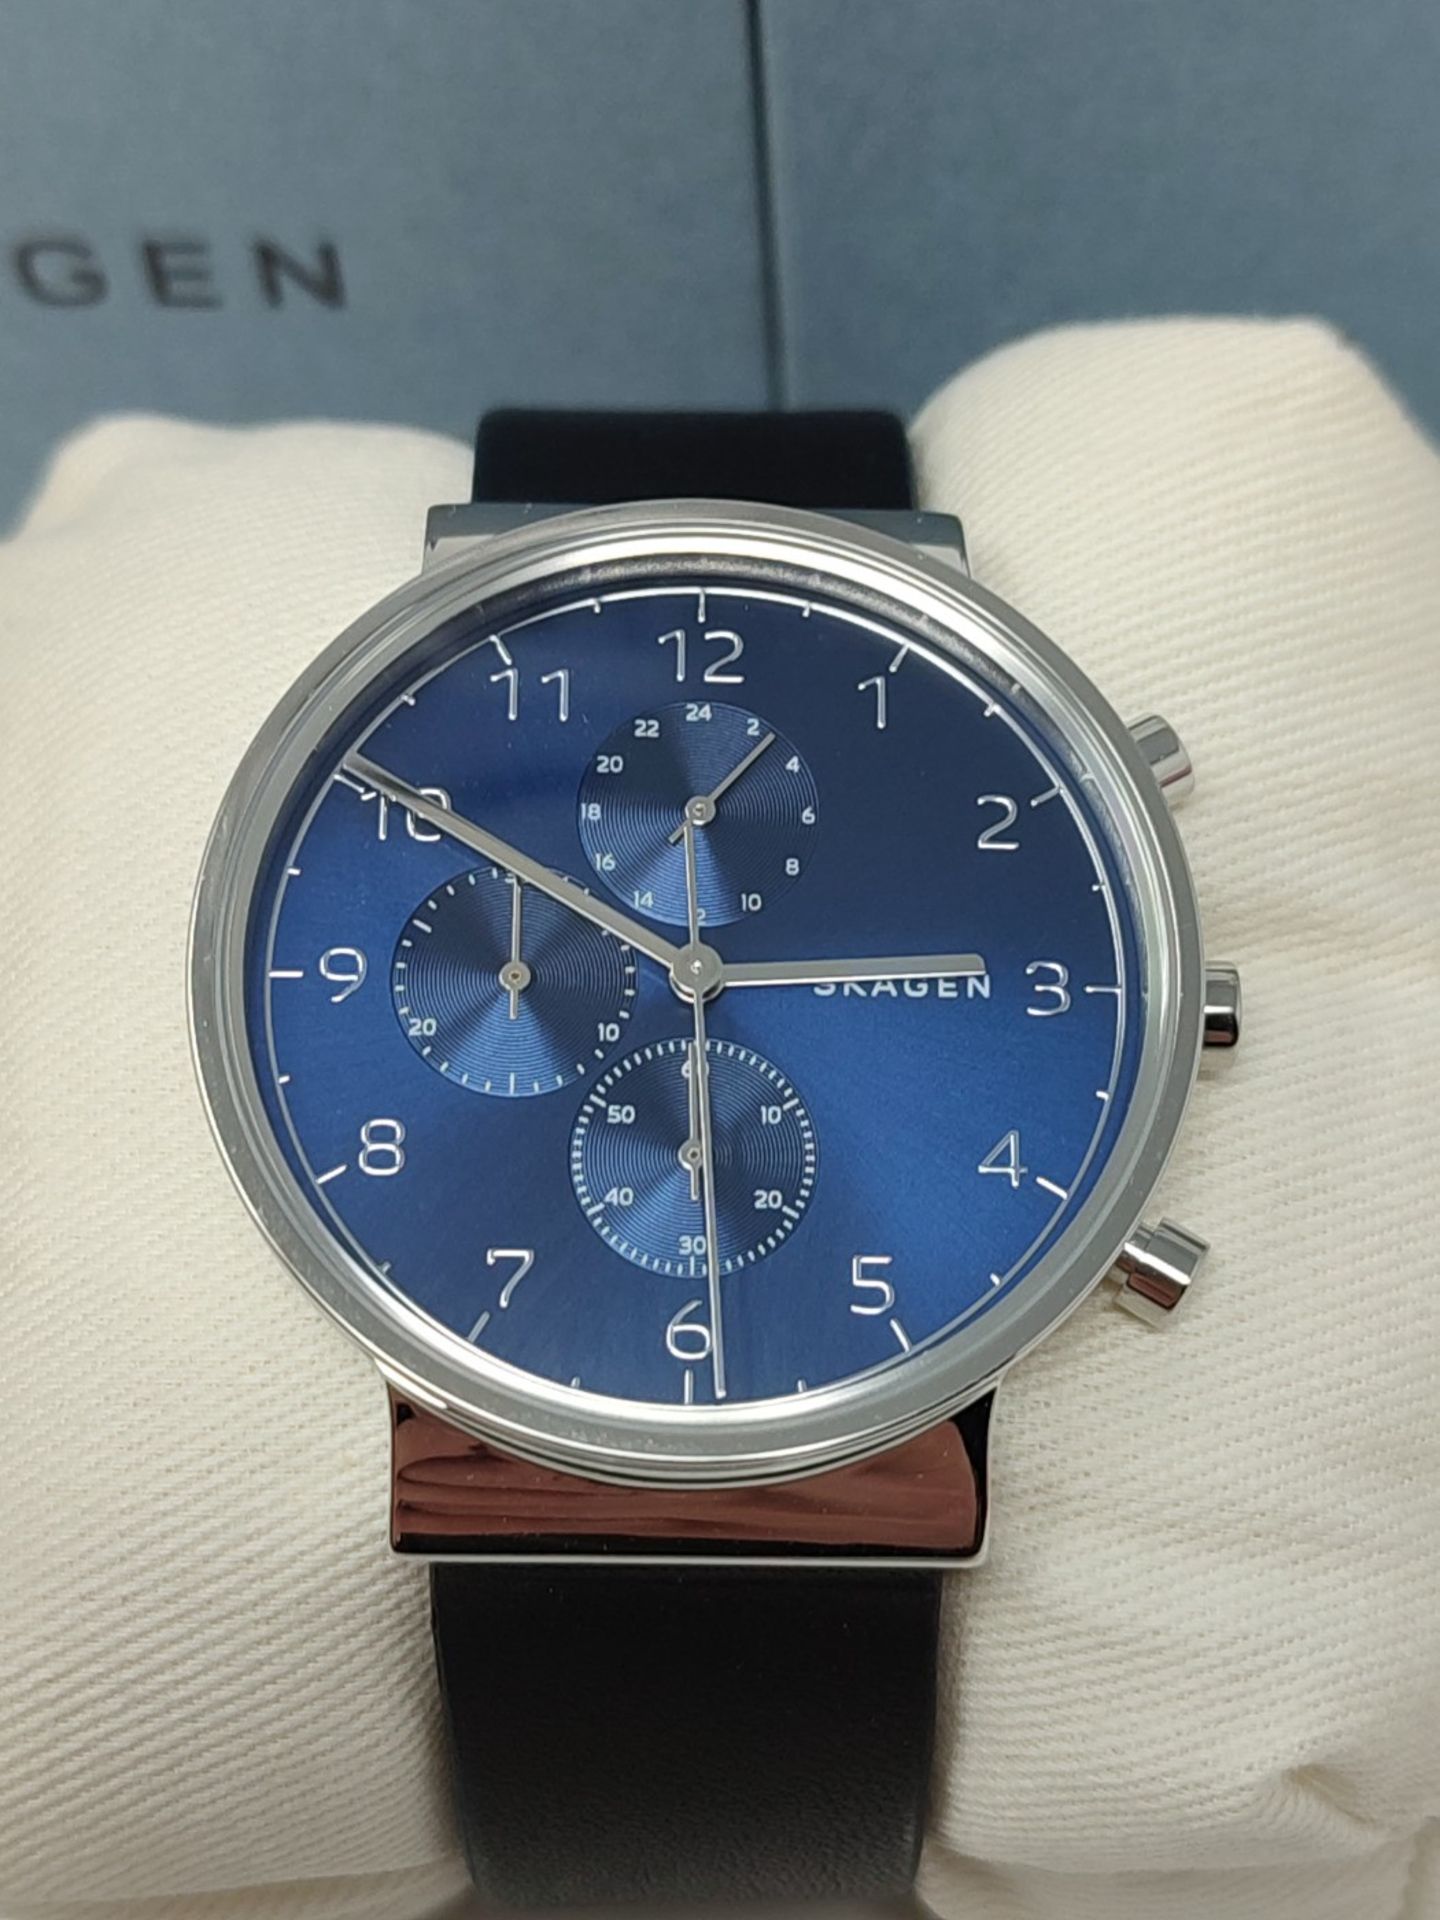 RRP £149.00 Skagen Mens Chronograph Quartz Watch with Leather Strap - Image 2 of 2